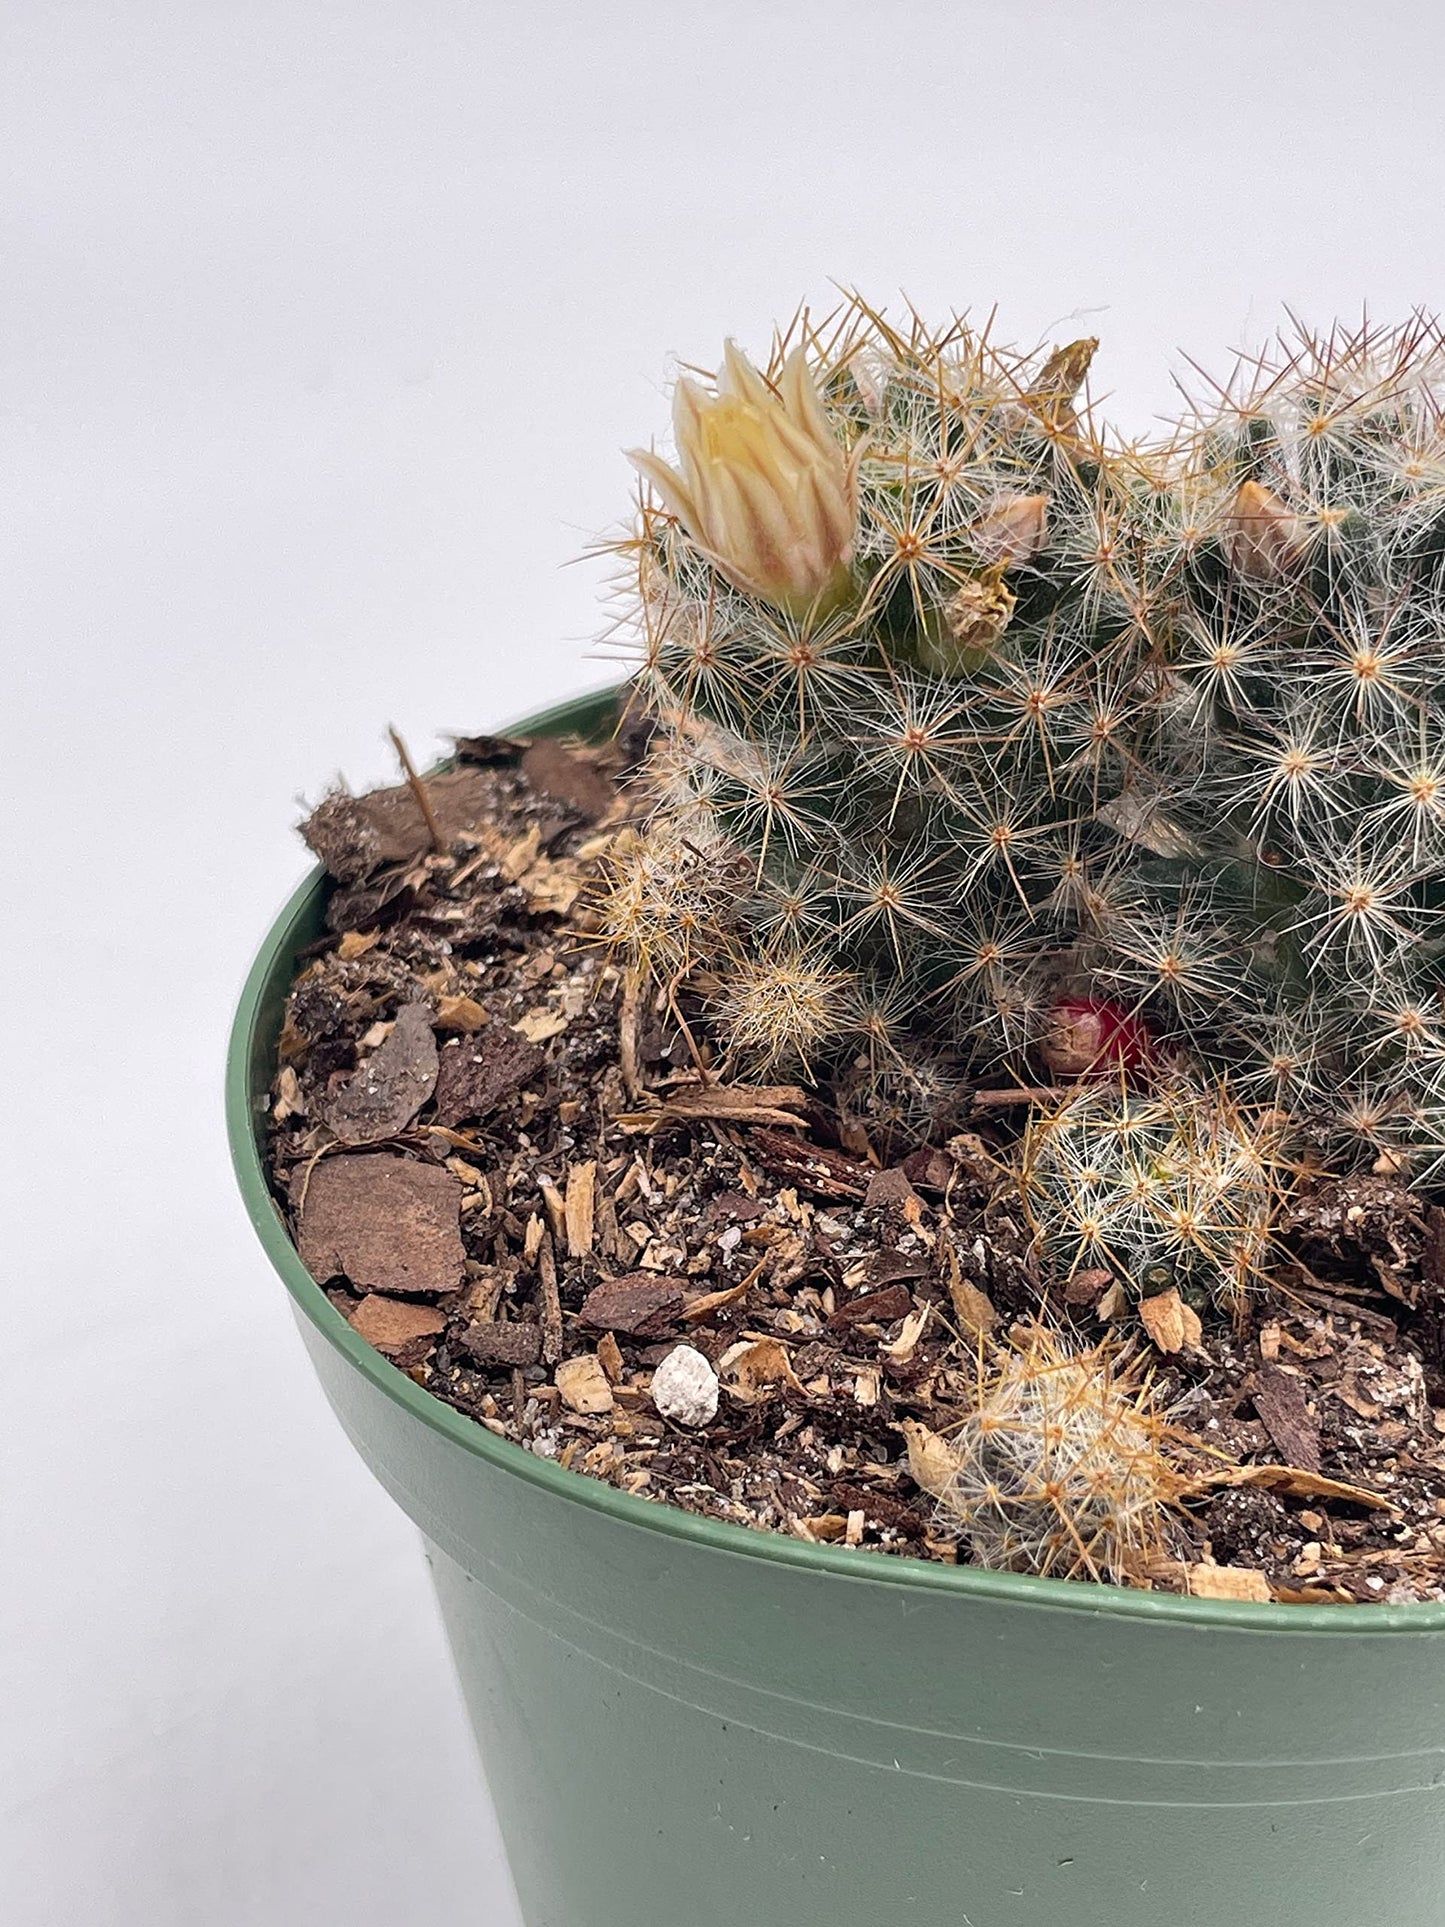 Mammillaria prolifera, Little Candle, Rare Cactus, 4 inch Pot, Well Rooted